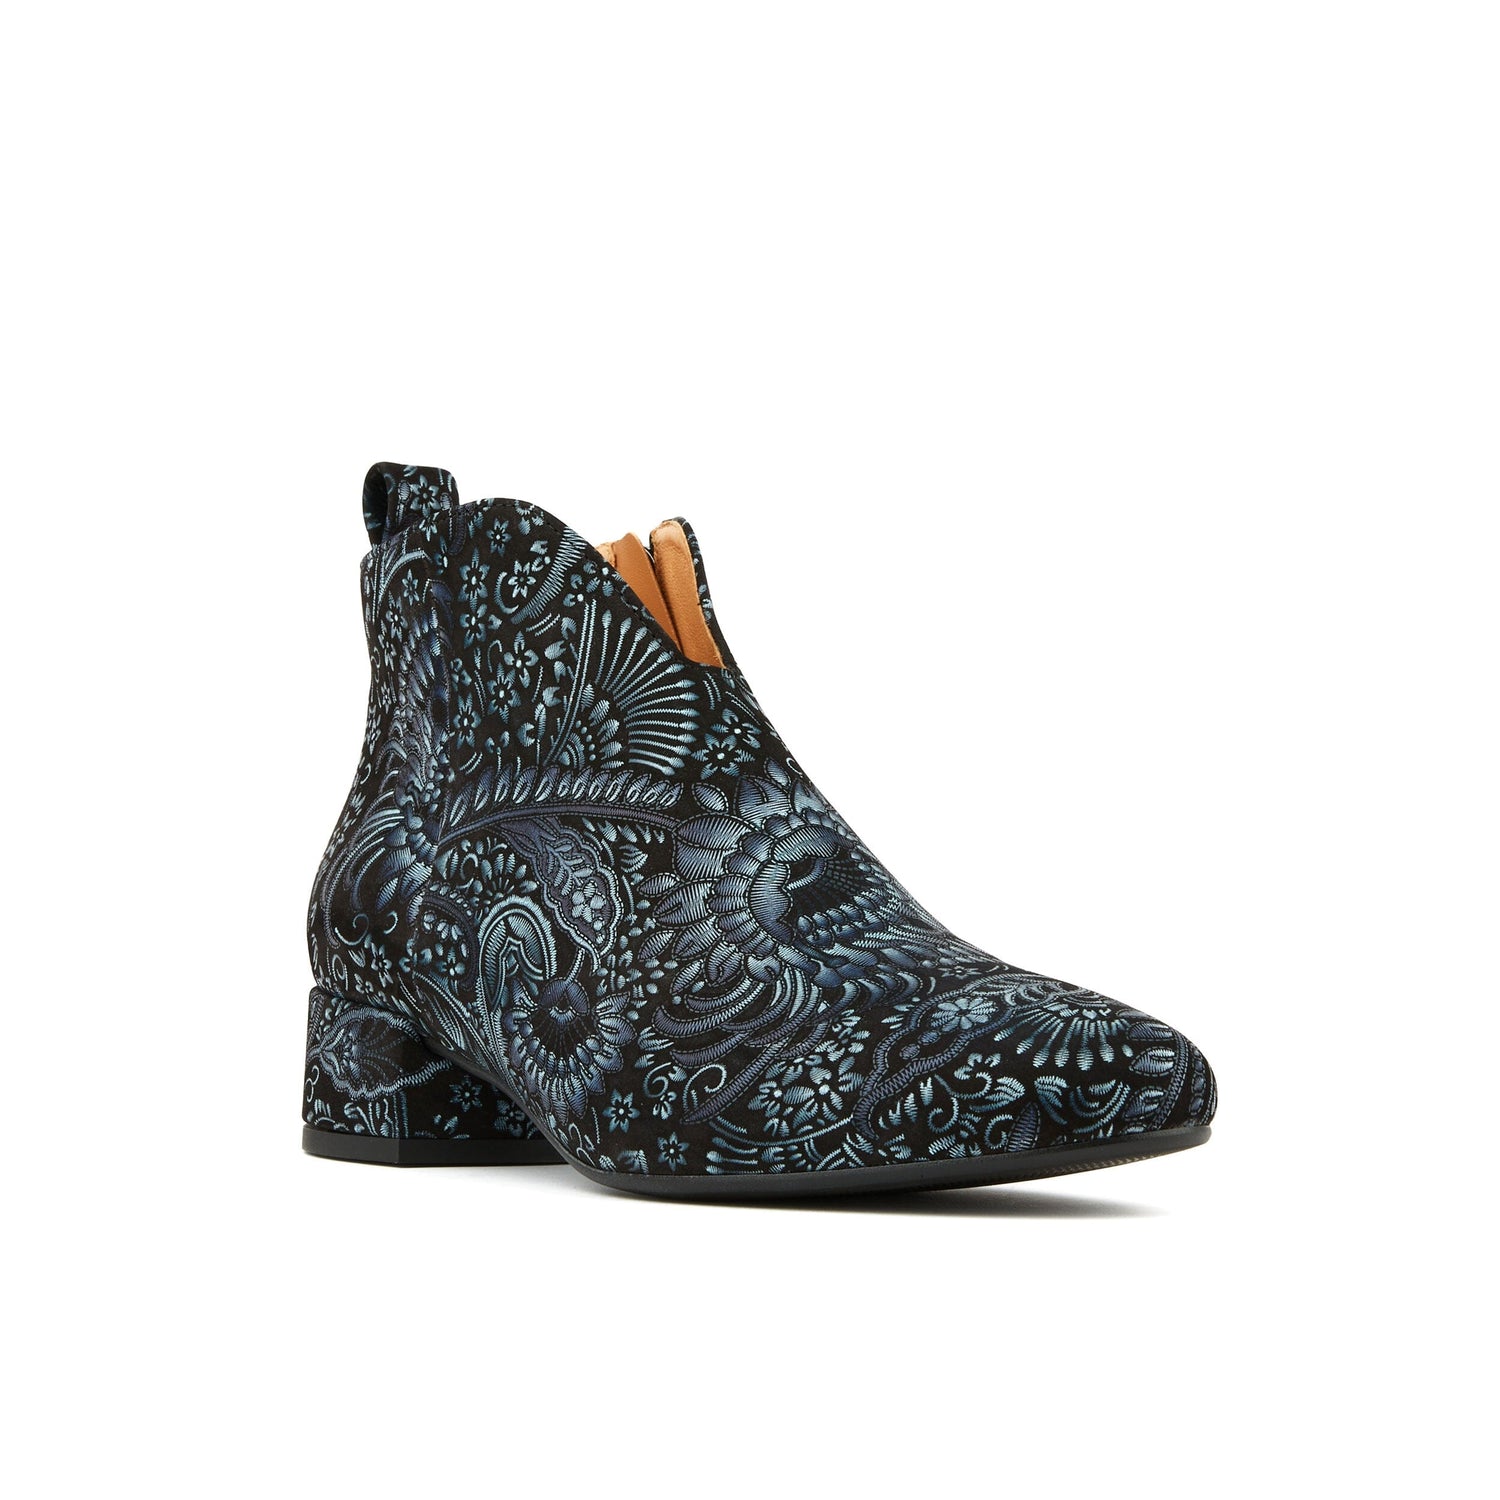 Iris - Black & Blue & Silver Floral Womens Ankle Boots Embassy London 